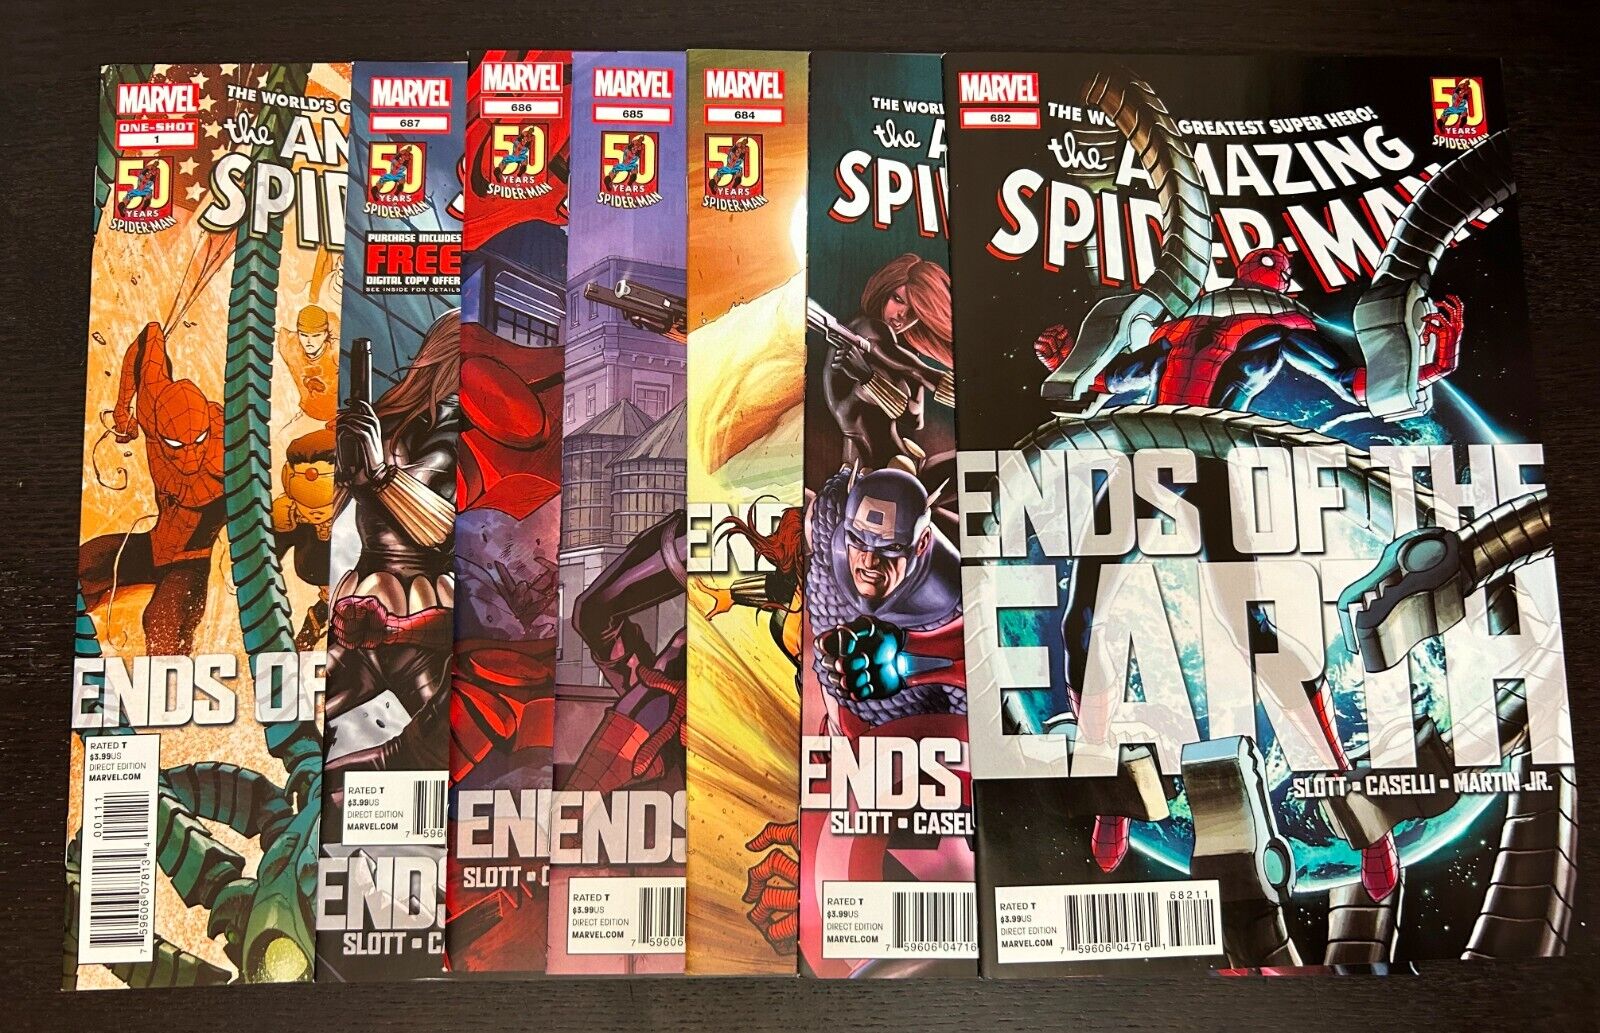 AMAZING SPIDER-MAN (2012 Marvel) -- #682-687 + One Shot -- FULL Ends Earth Story